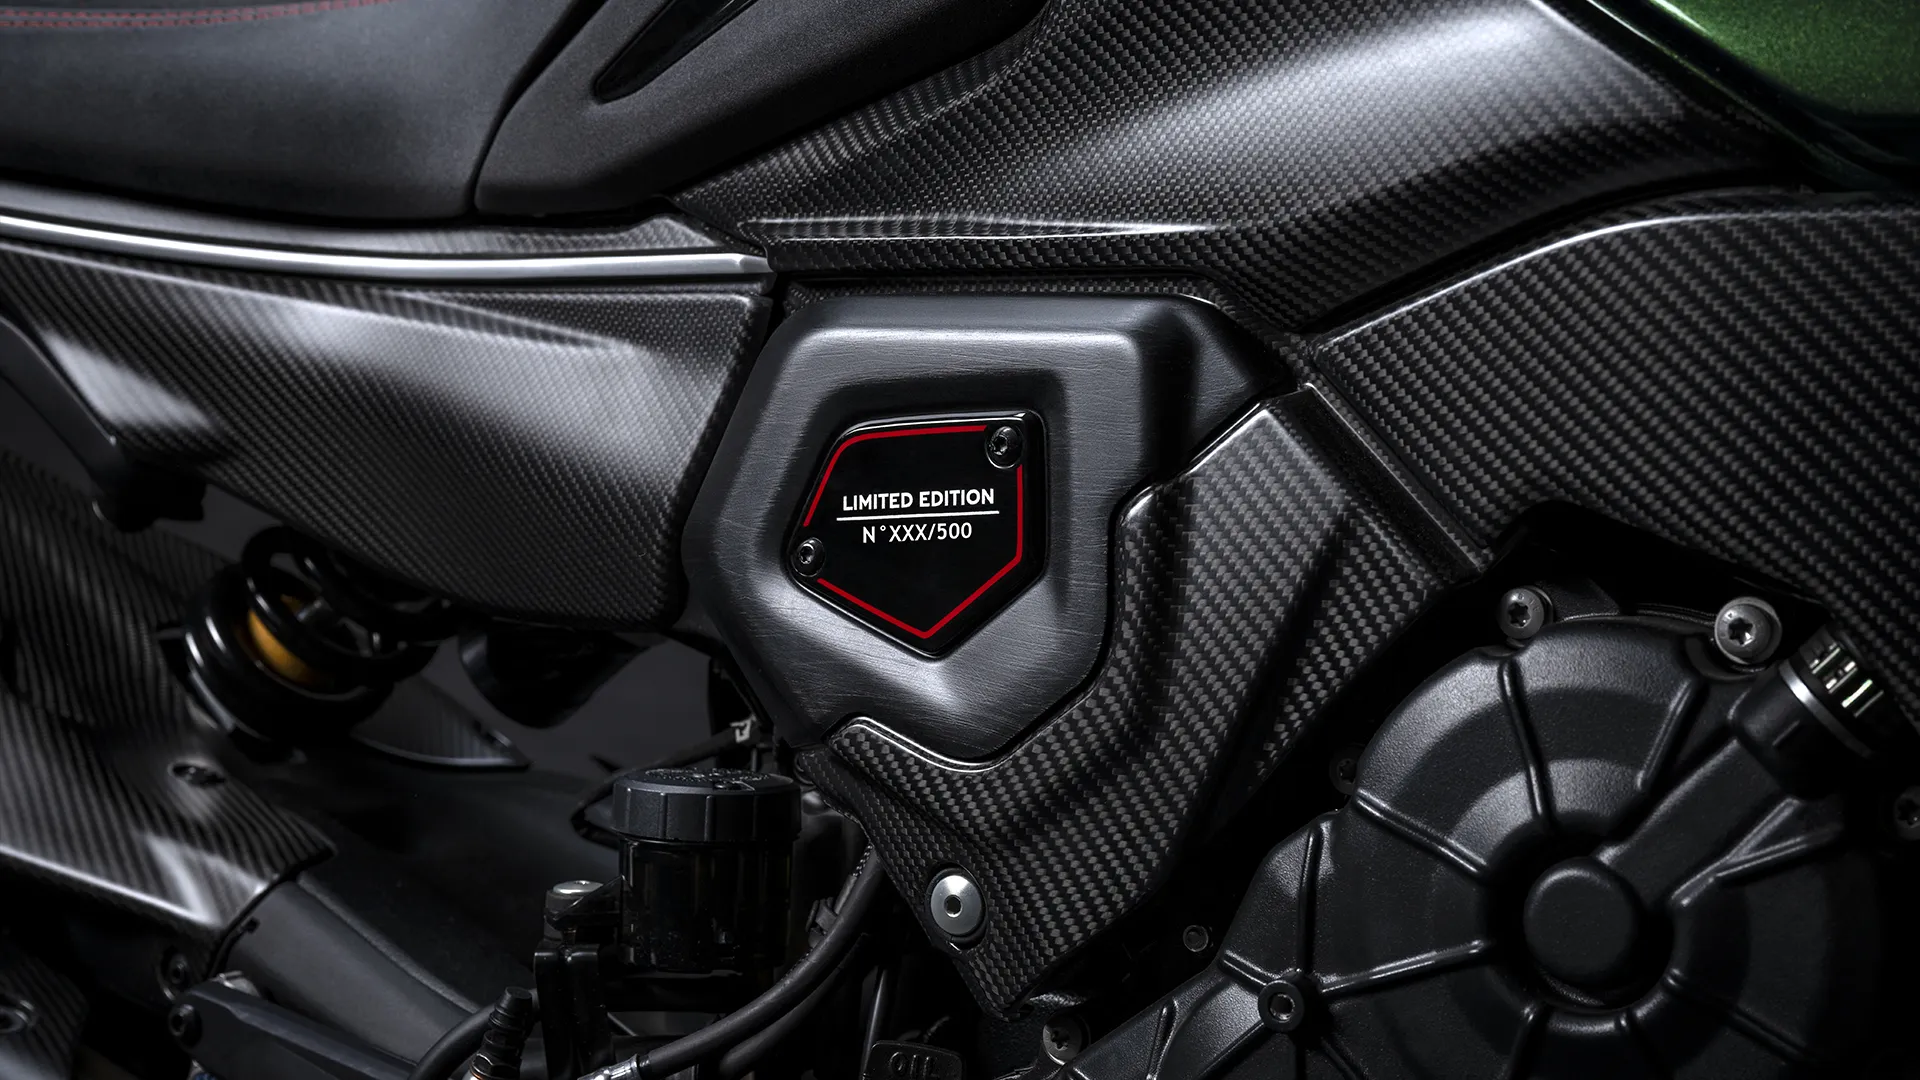 Ducati-Diavel-V4-for-Bentley-DWP24-Overview-gallery-1920x1080-06